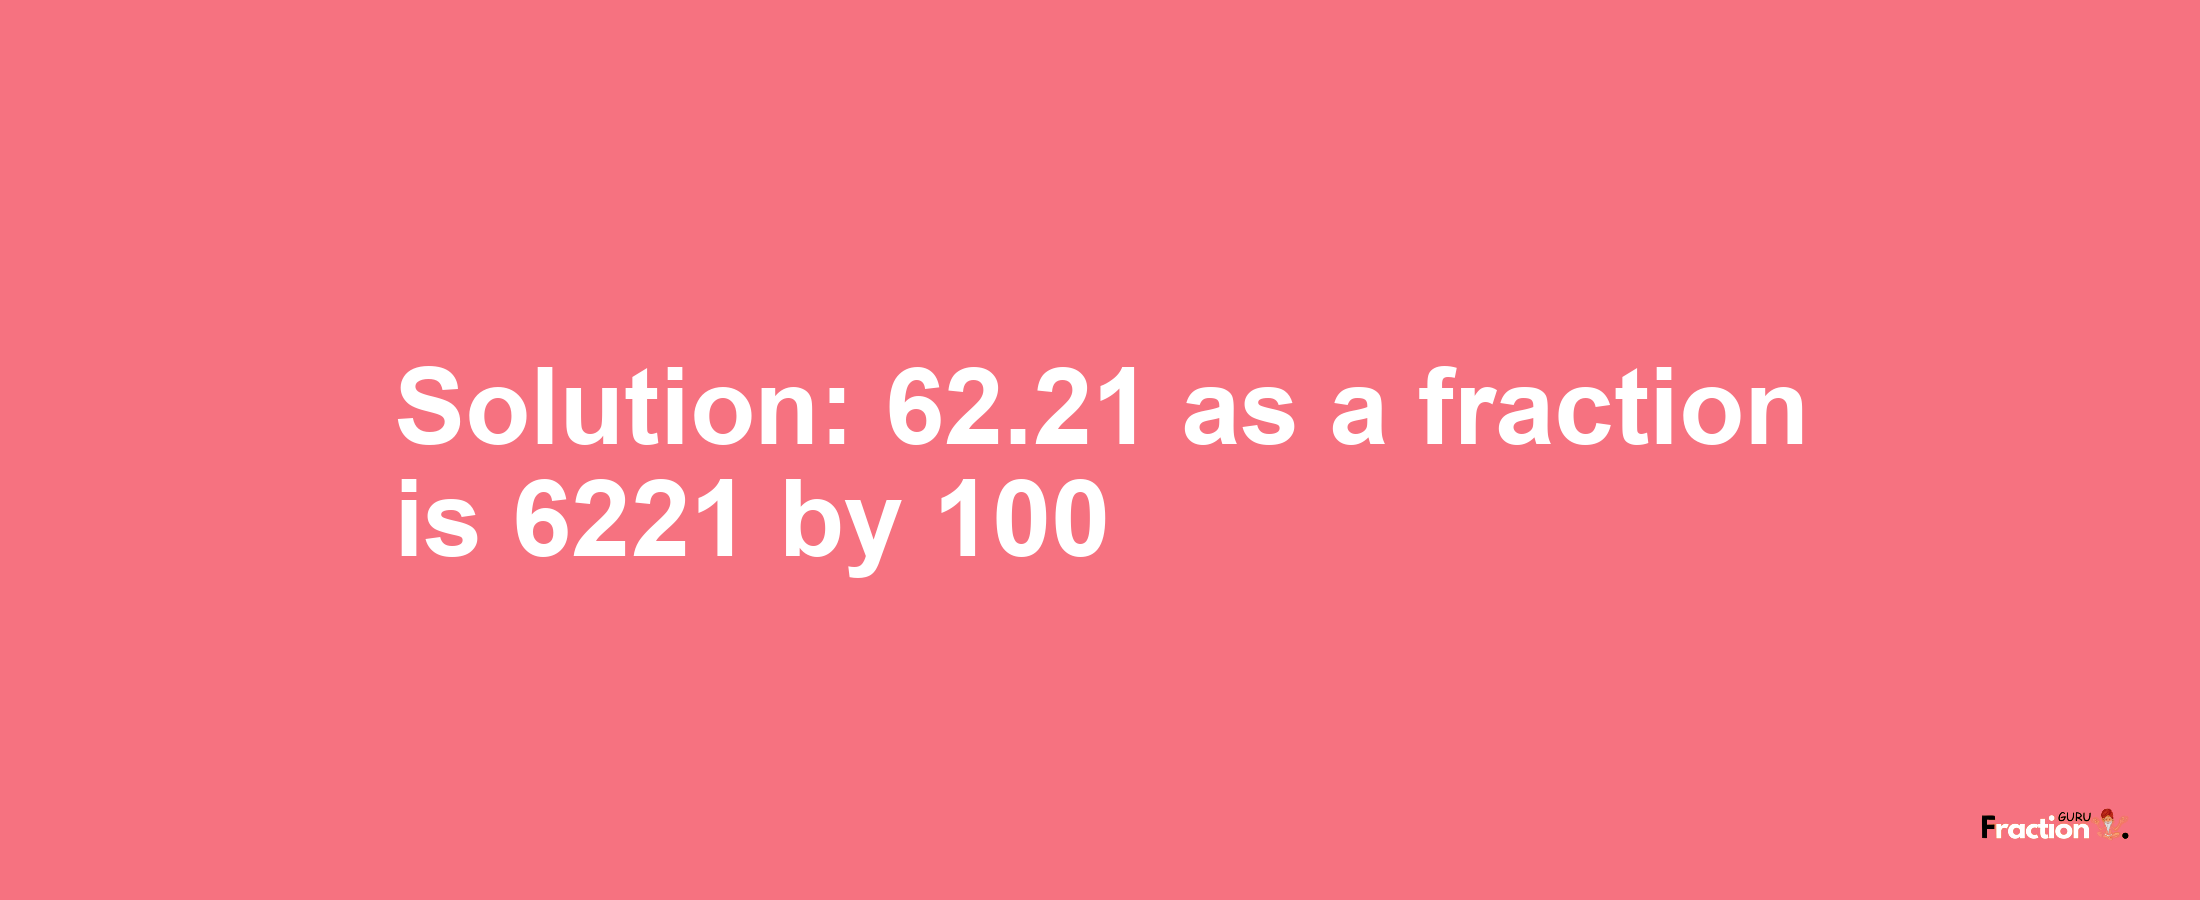 Solution:62.21 as a fraction is 6221/100